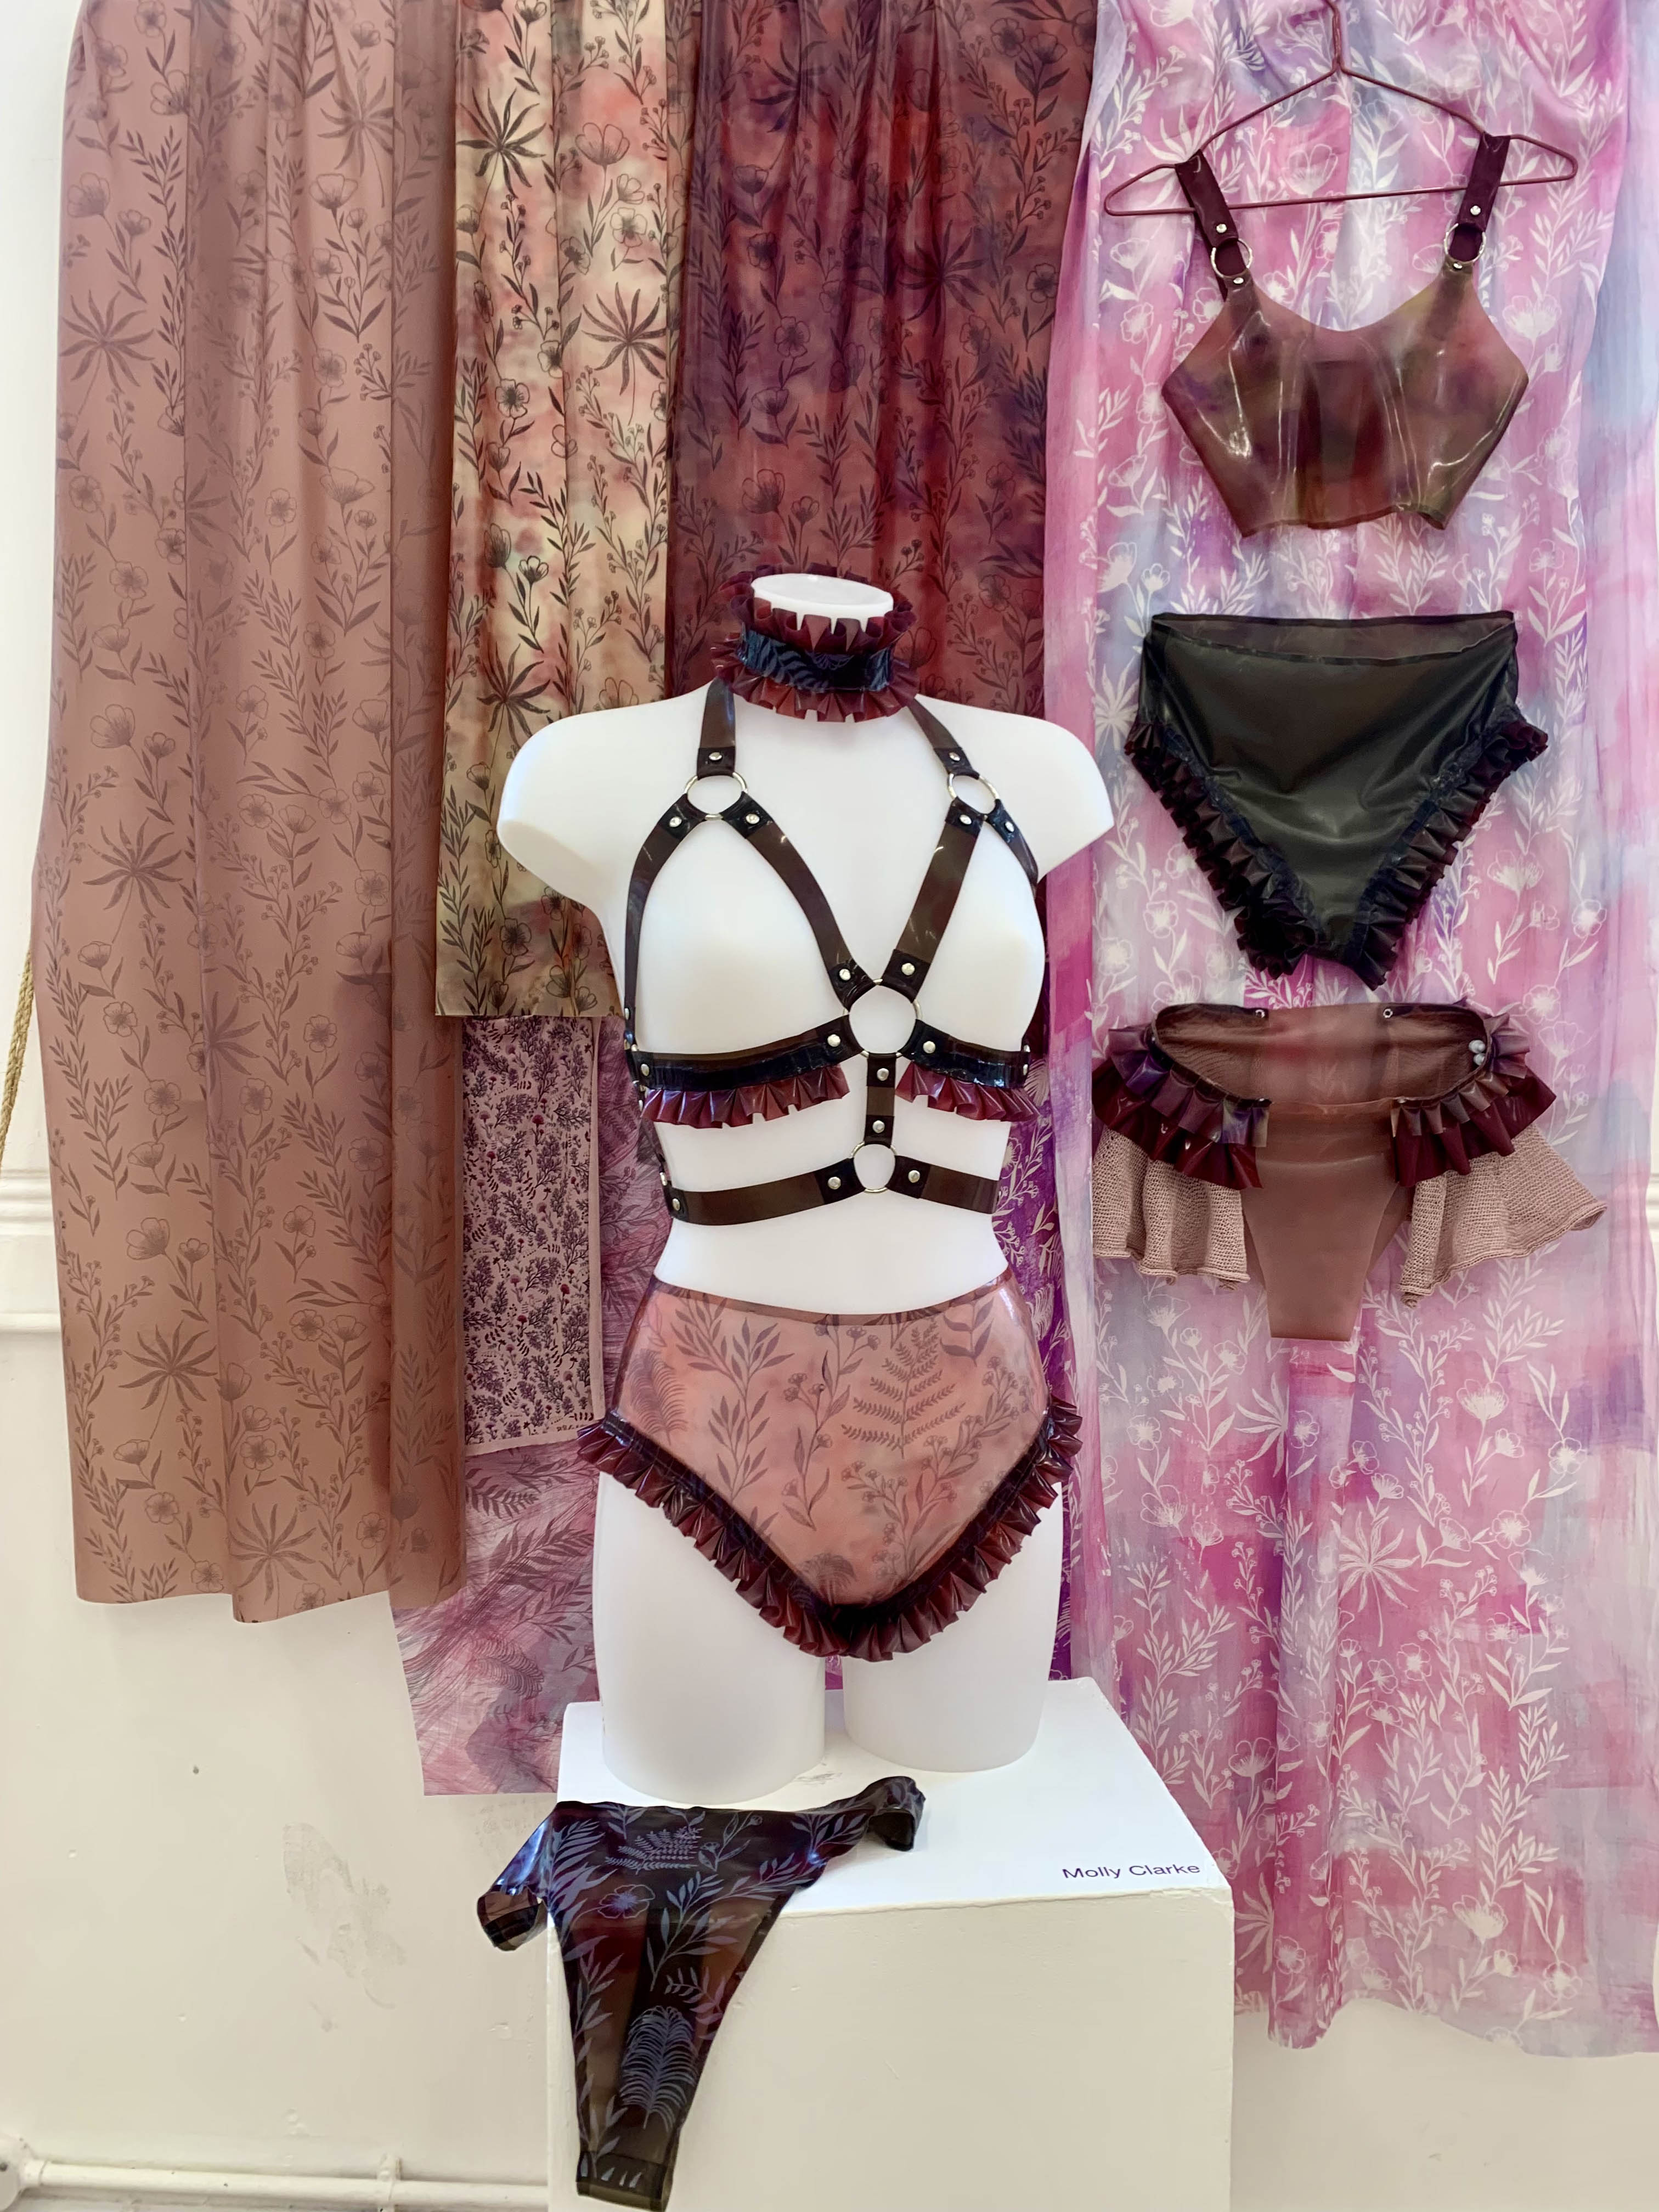 A collection of botanical screen printed samples on latex and silk, colourful printed designs on a watercolour like background, and hung garment made of printed latex.